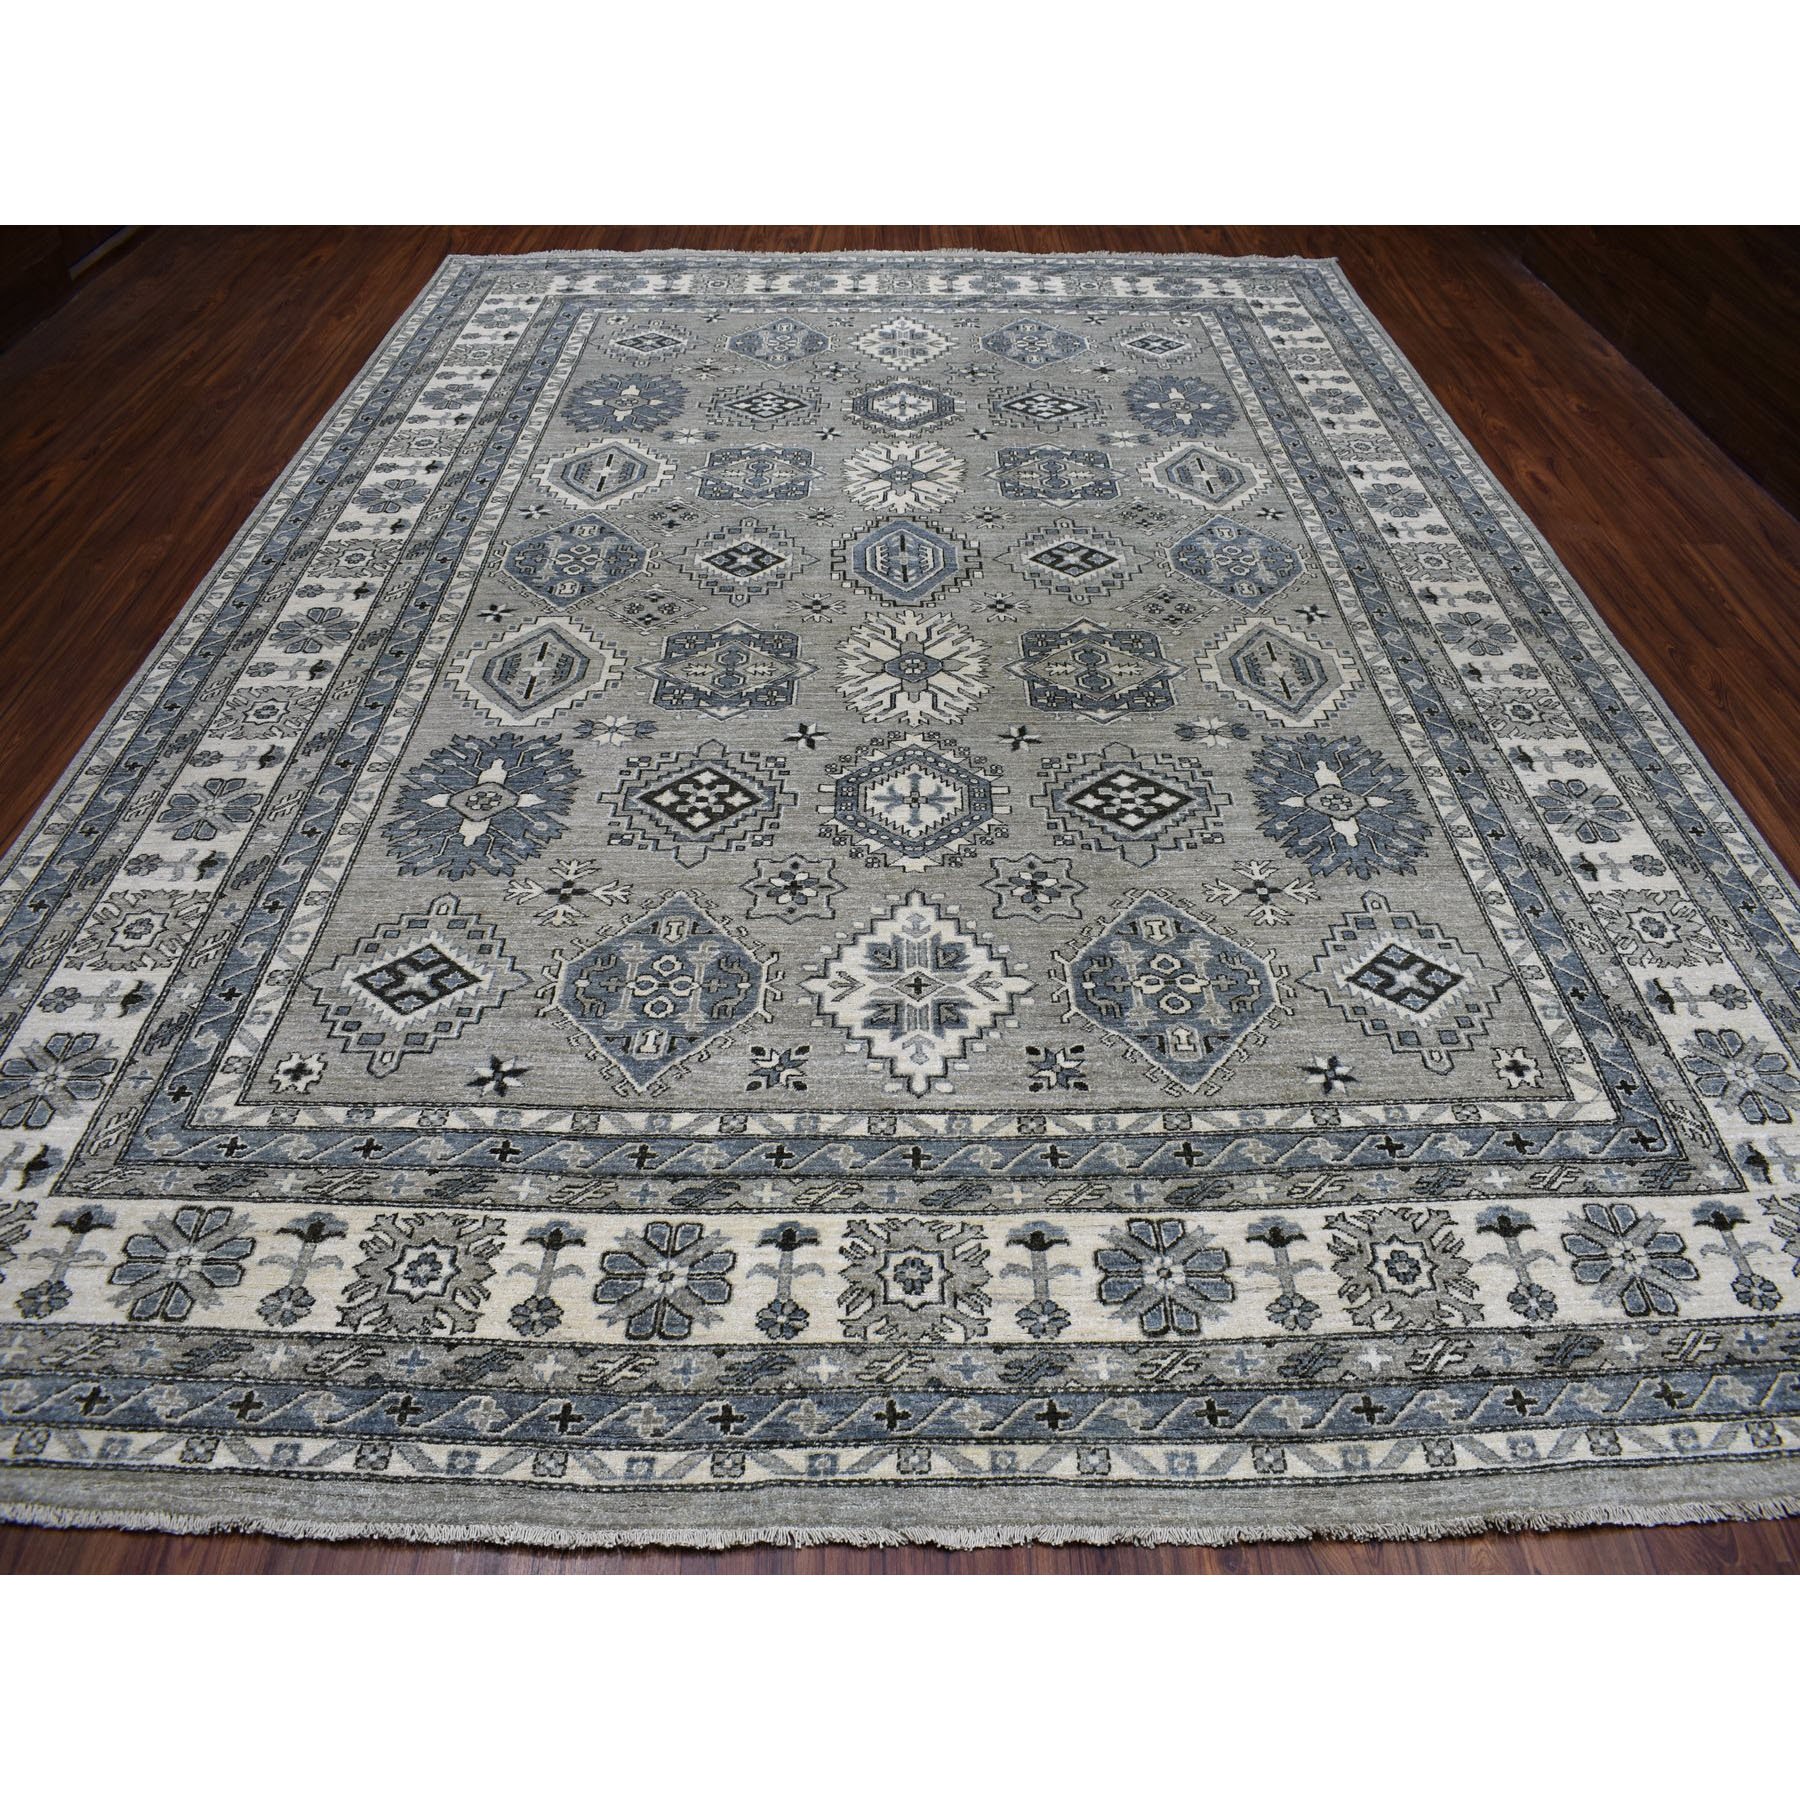 10-1 x13-8  Gray Pure Wool Hand-Knotted Peshawar With Karajeh Design Oriental Rug 